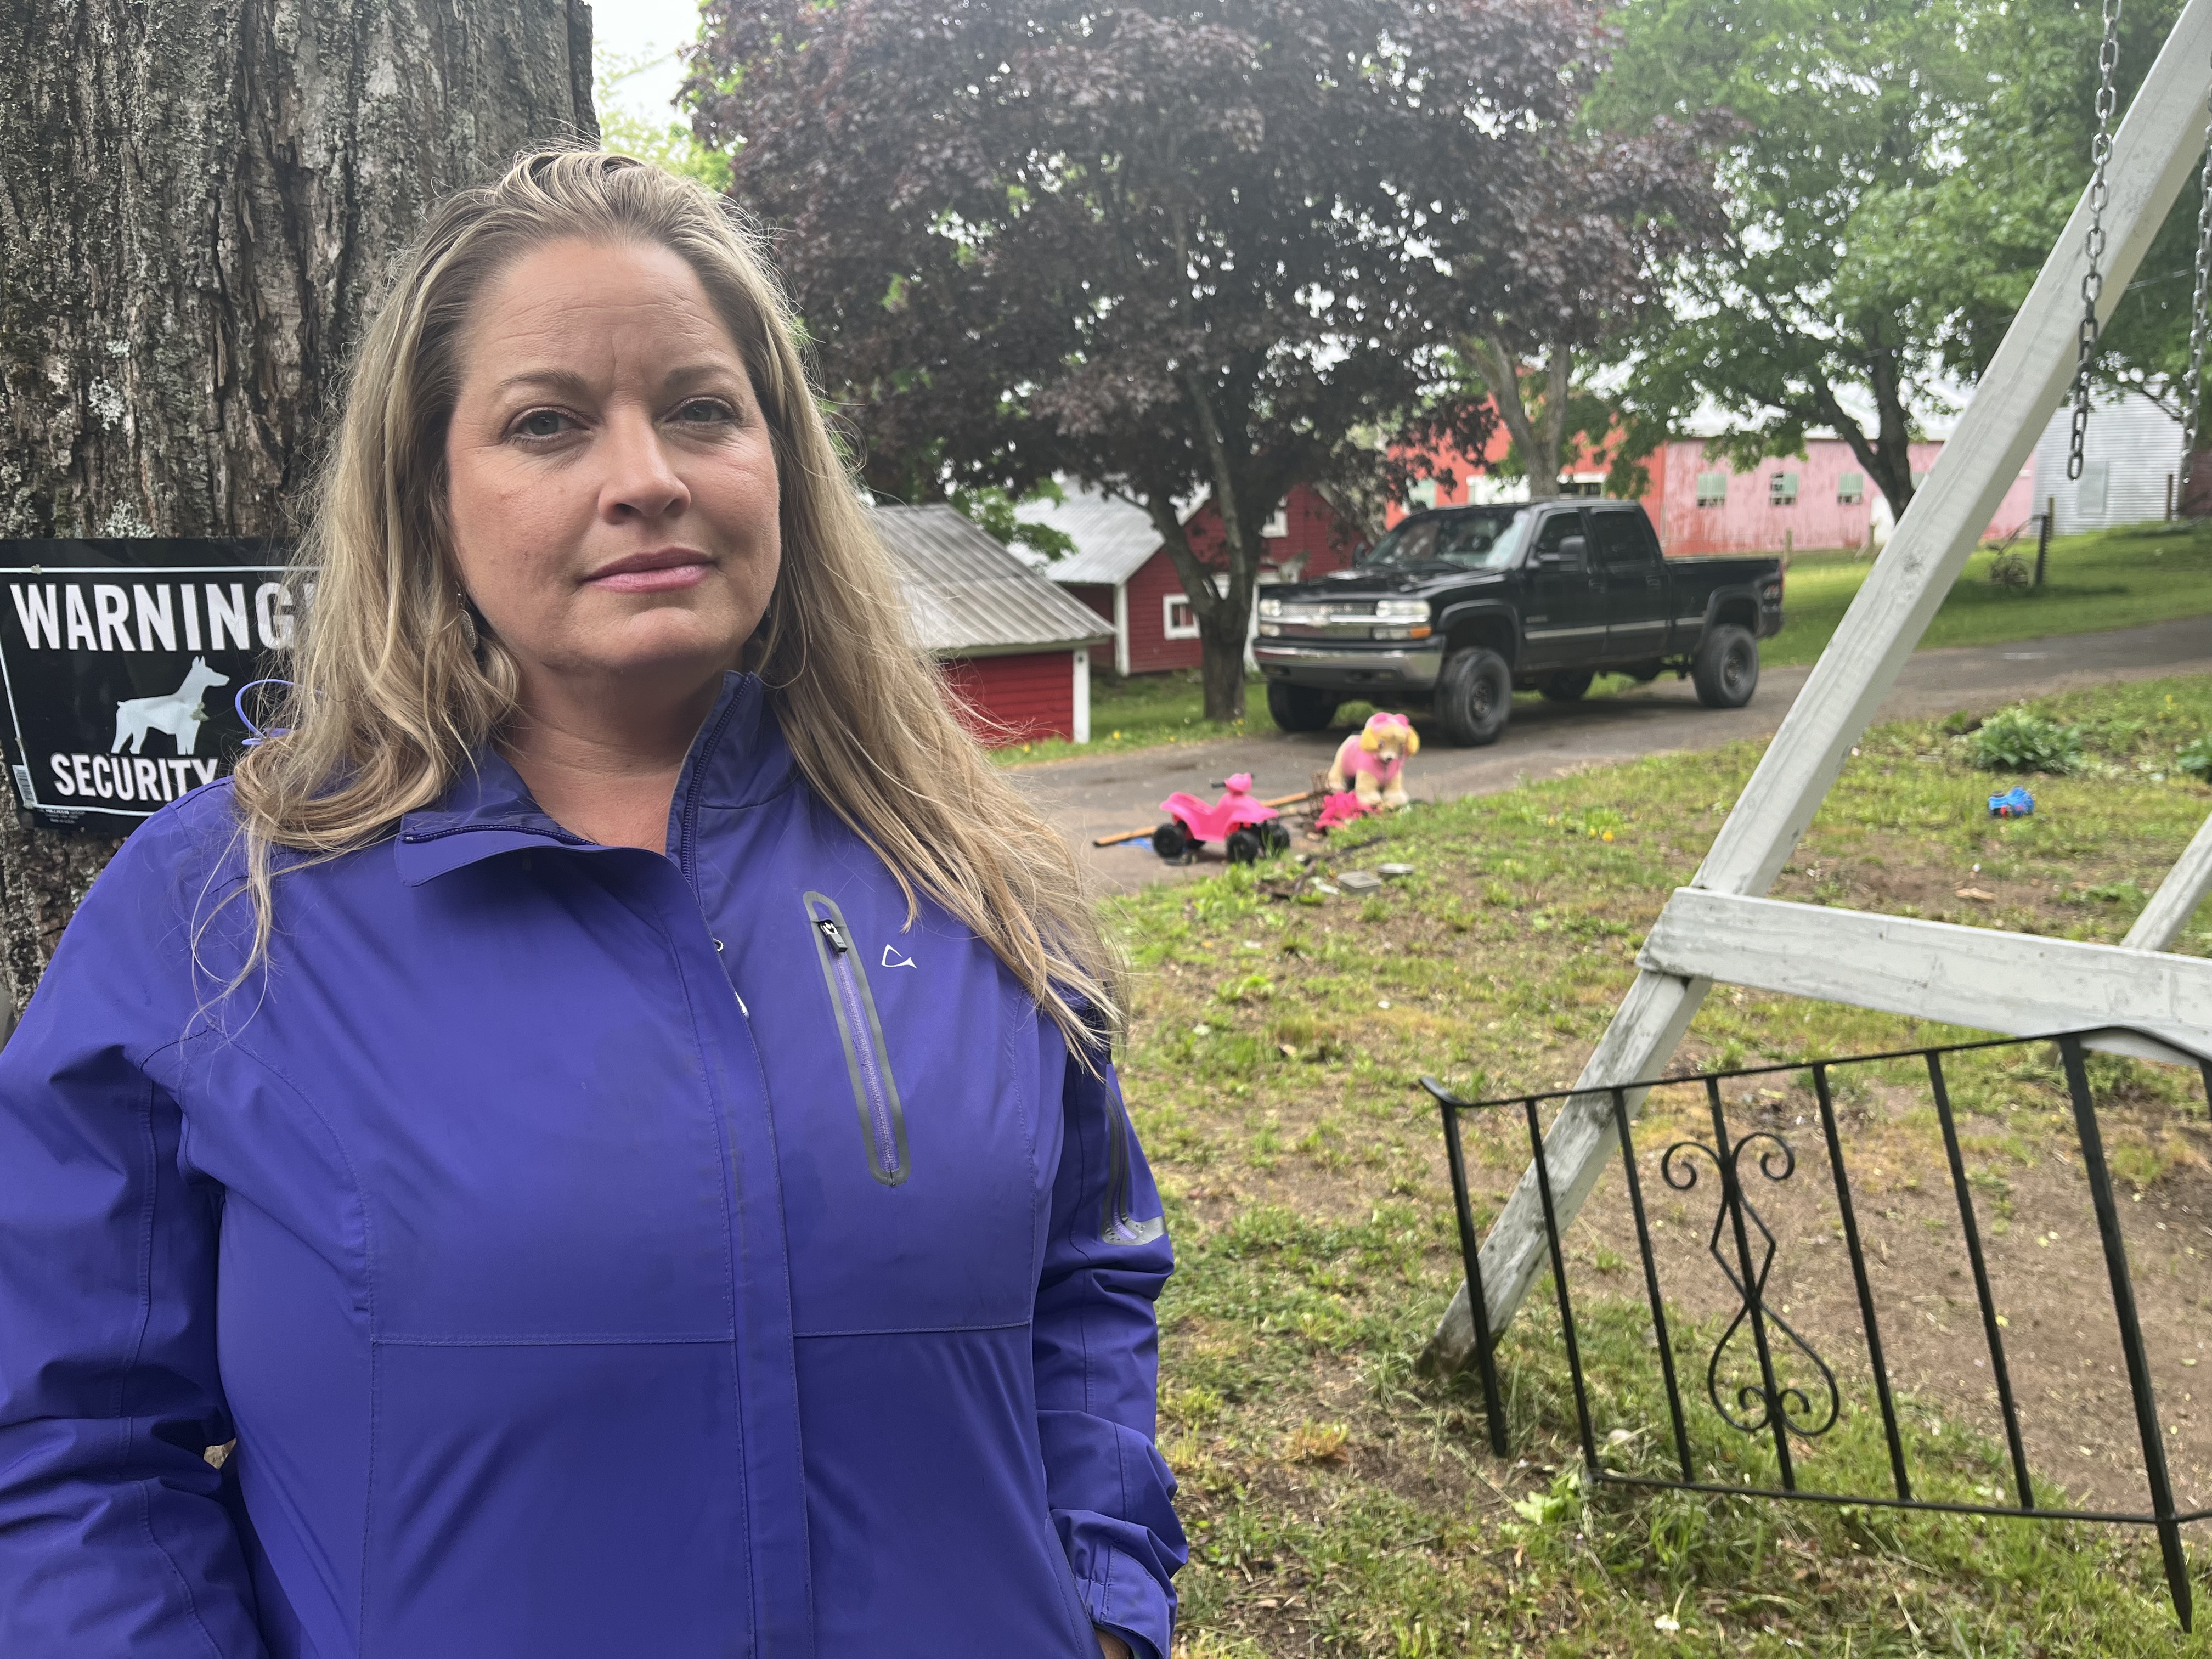 ‘Heart-wrenching’: Family’s motorhome stolen from front yard just days after buying it